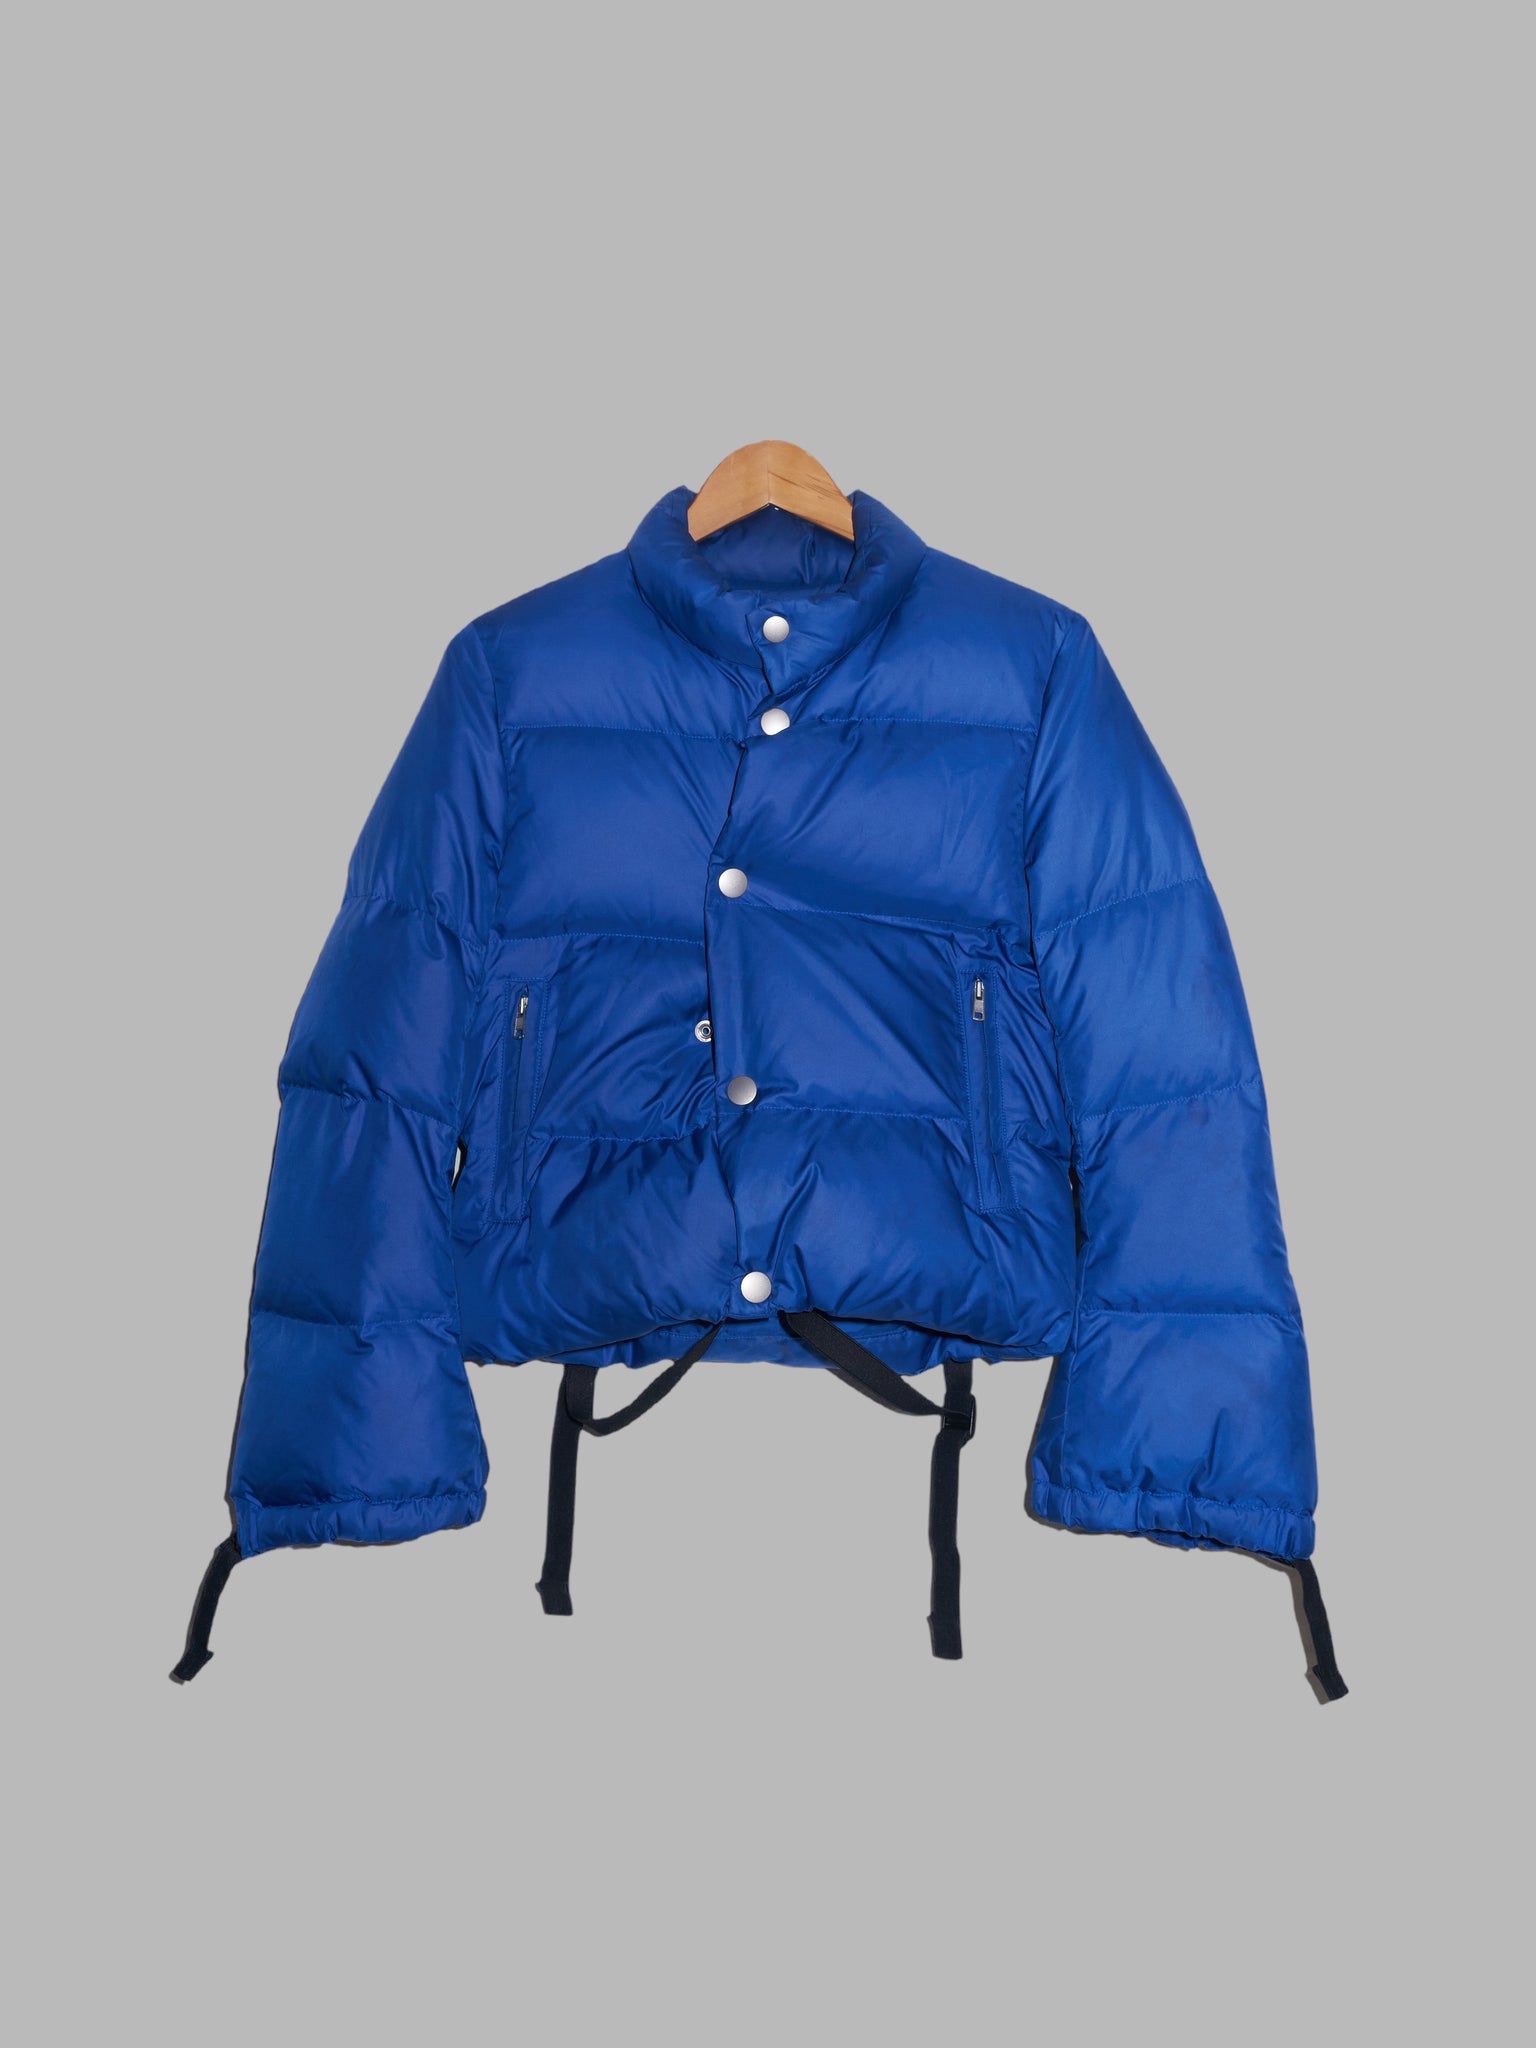 Junya Watanabe Comme des Garcons AW2007 blue poly tape detail puffer jacket